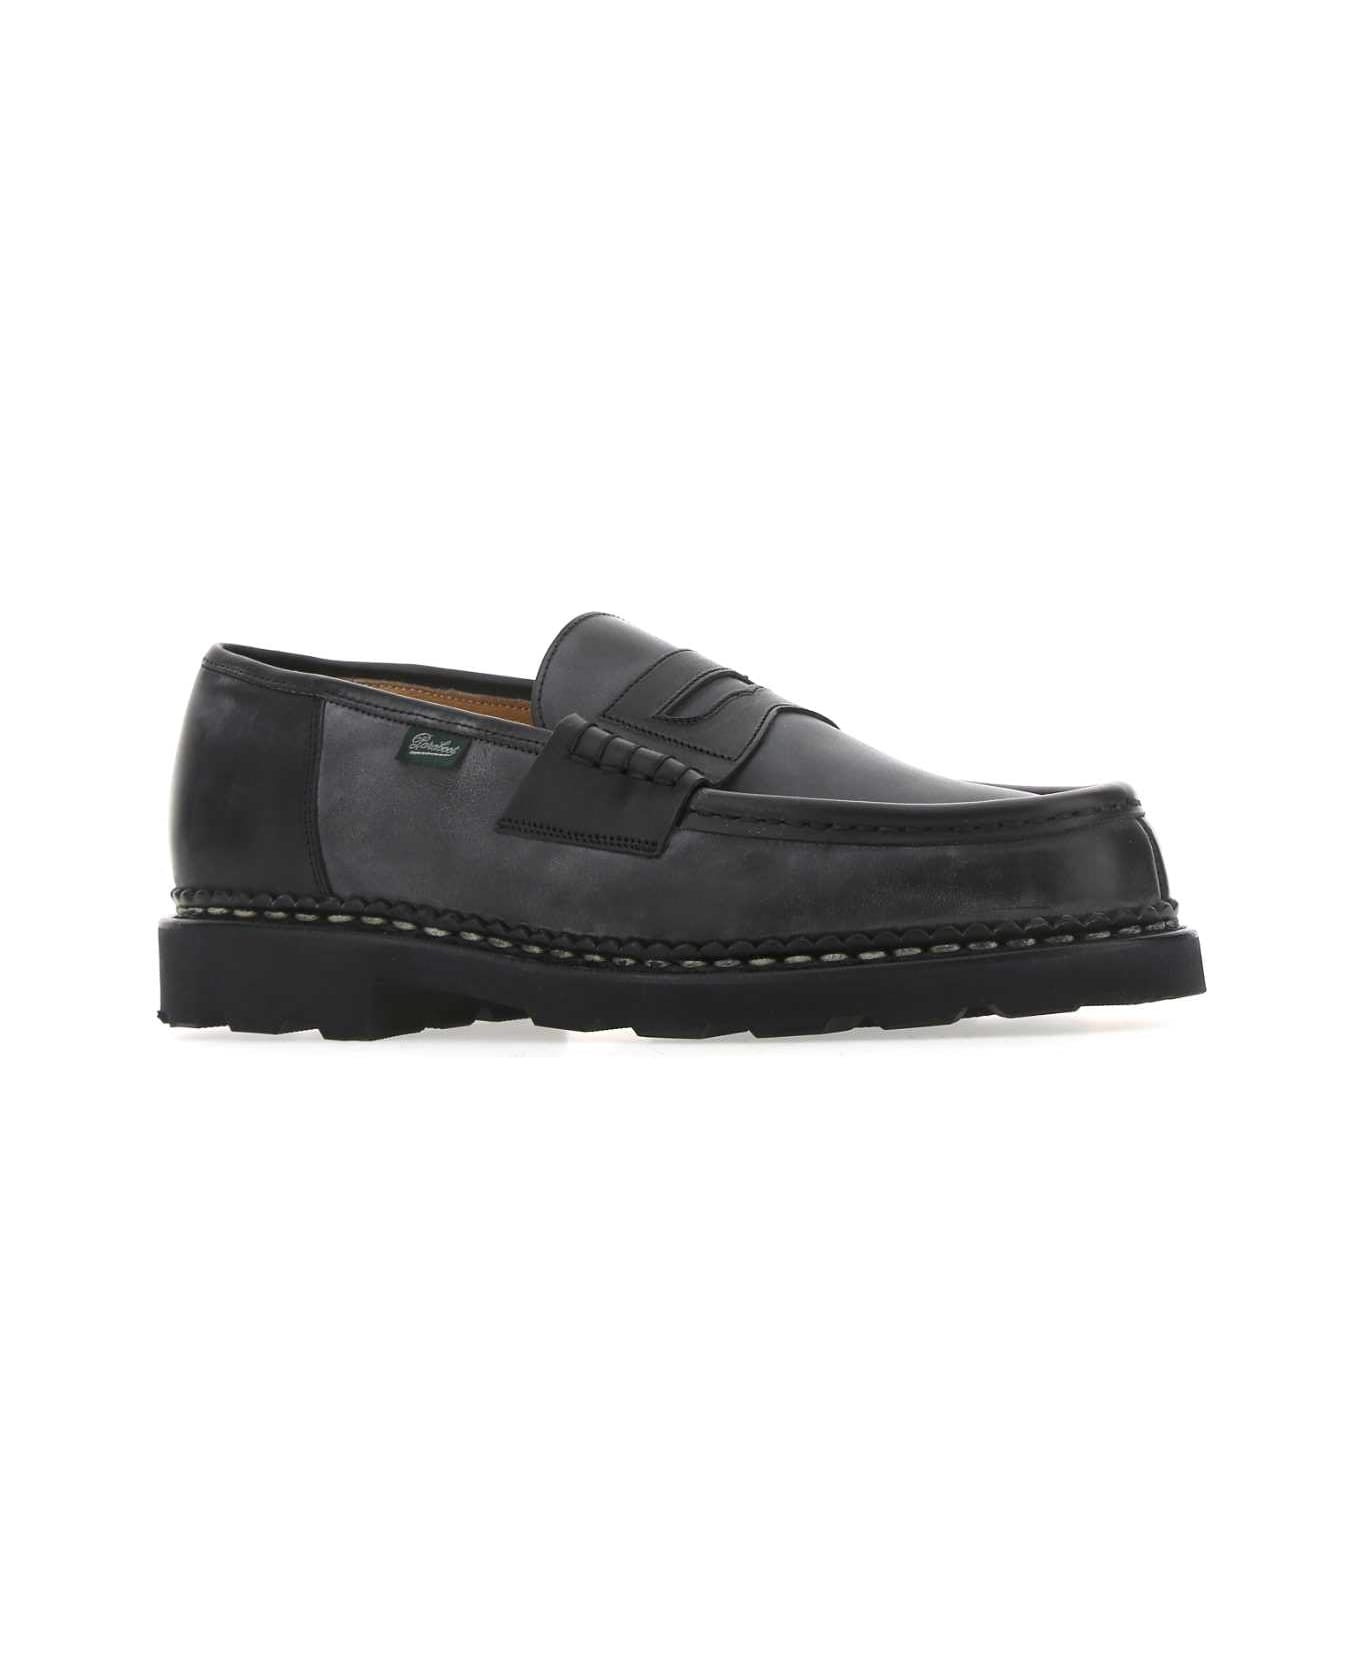 Paraboot Black Leather Loafers - NOIR